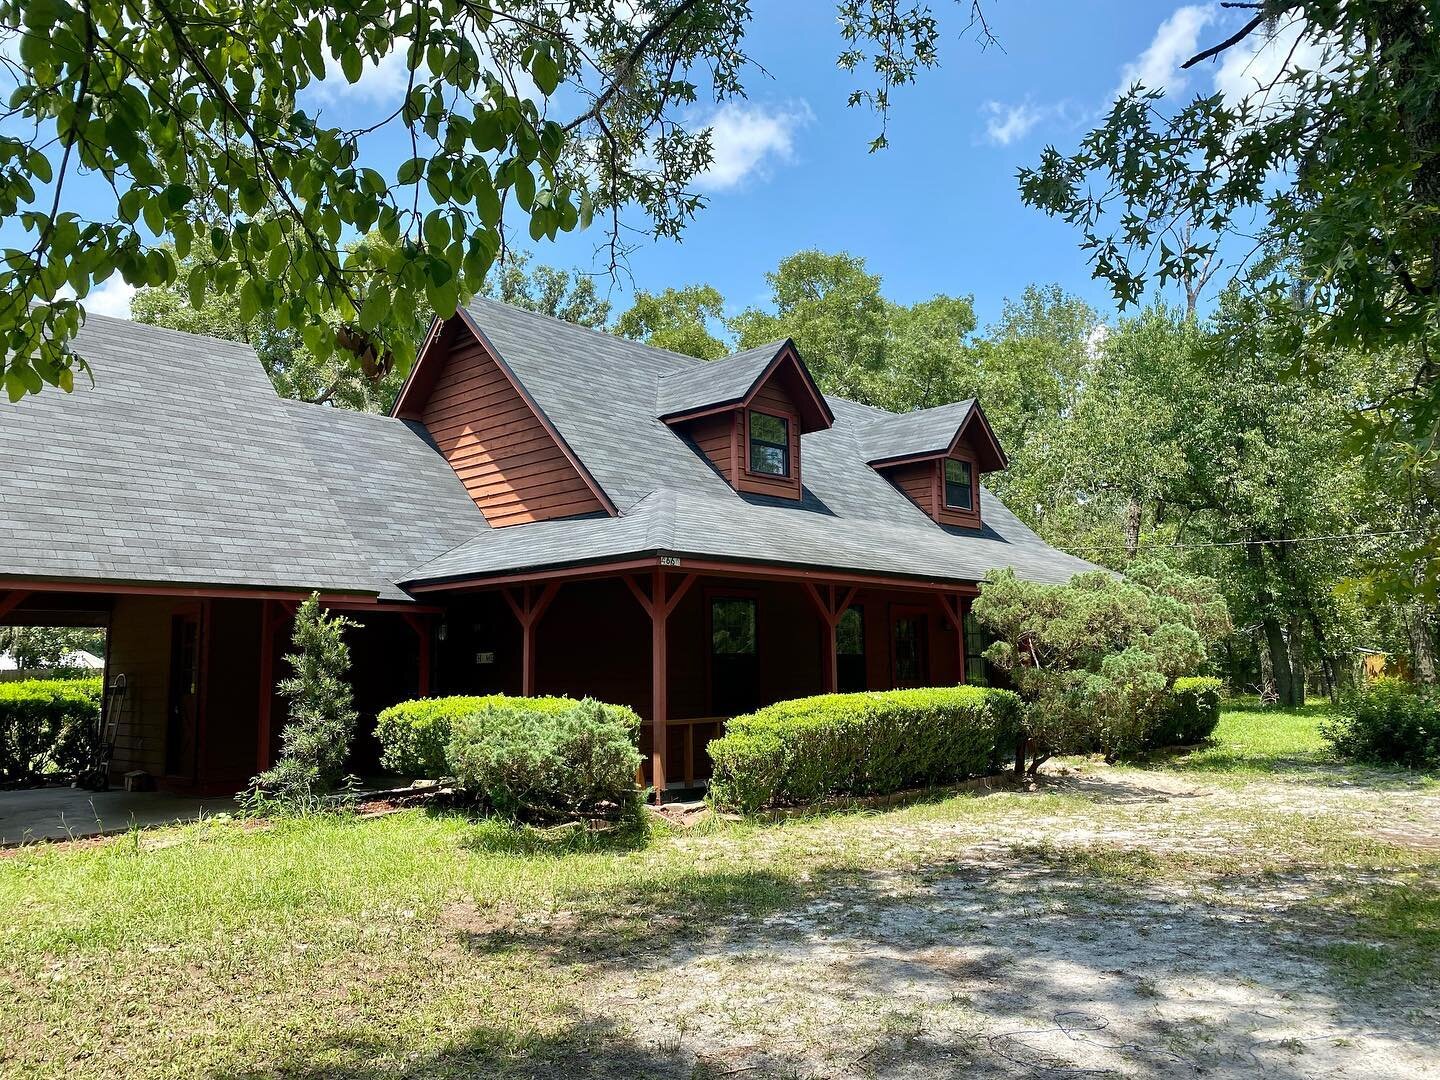 Congratulations to my buyer for just closing on this little cabin in the woods! He asked for acreage, privacy, and to be close to work&mdash; consider it done! I hope you and the pup enjoy your new home! 

#madsaboutjax #madsaboutrealestate #realtor 